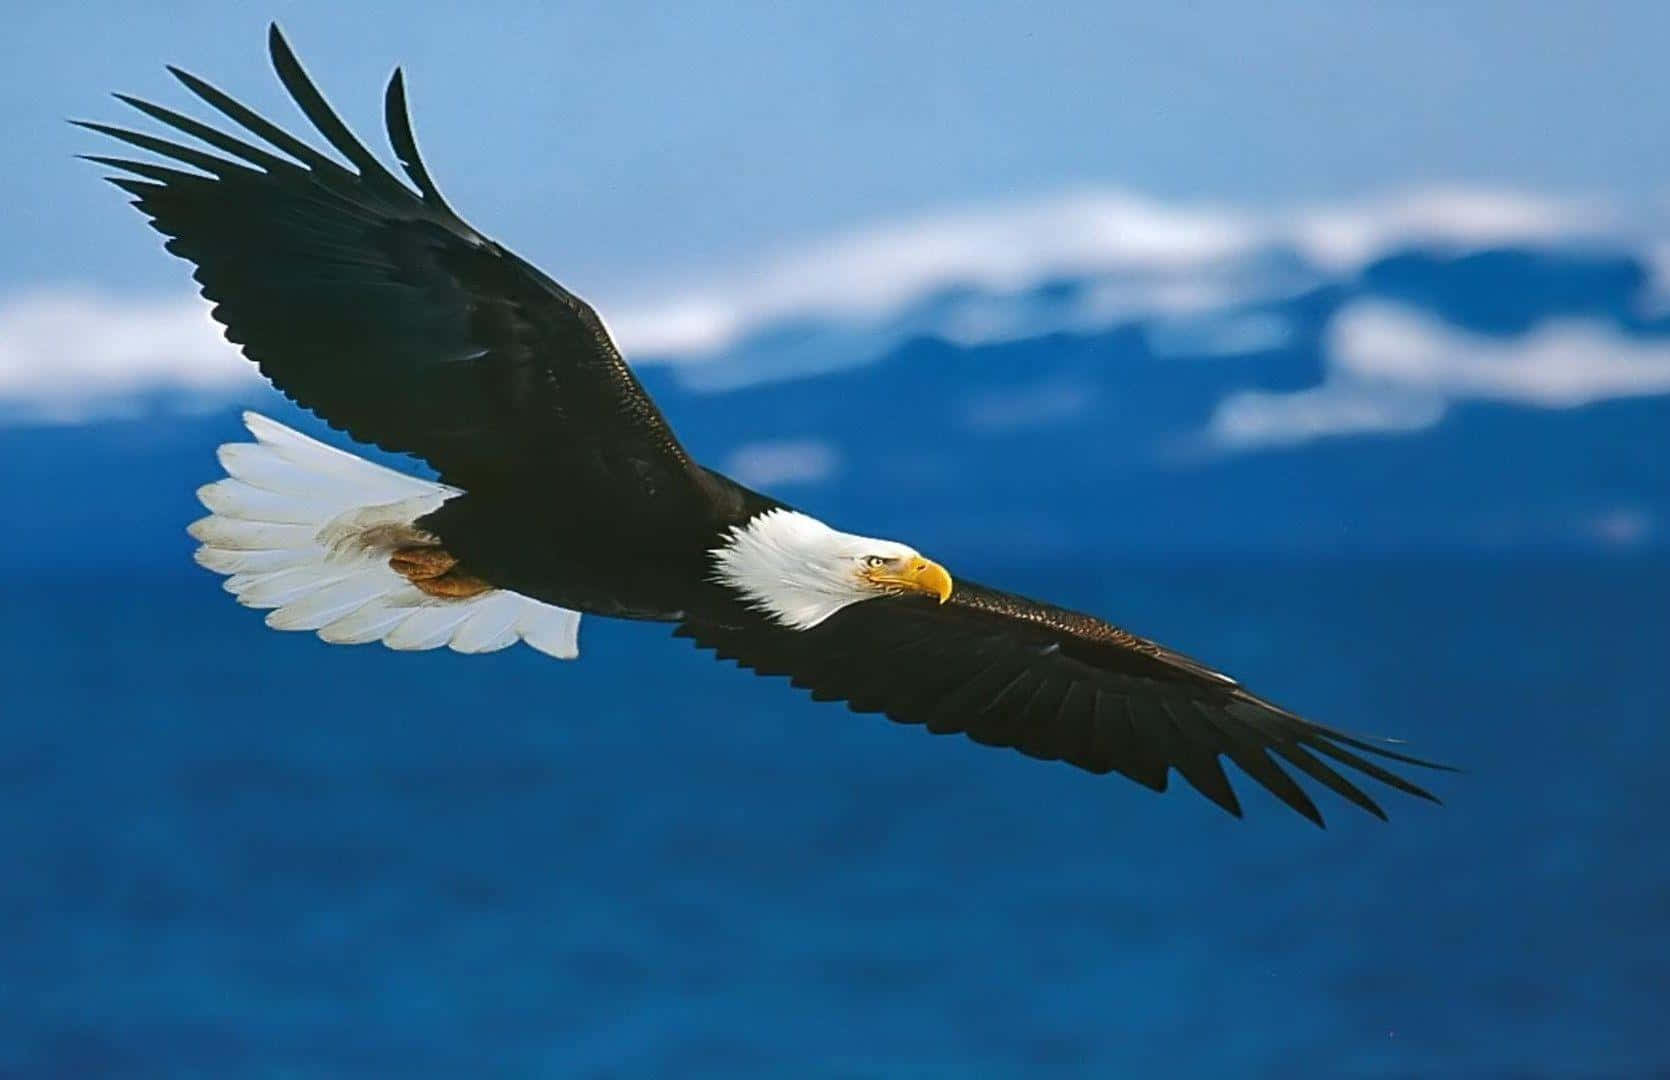 An Eagle Soaring High Above